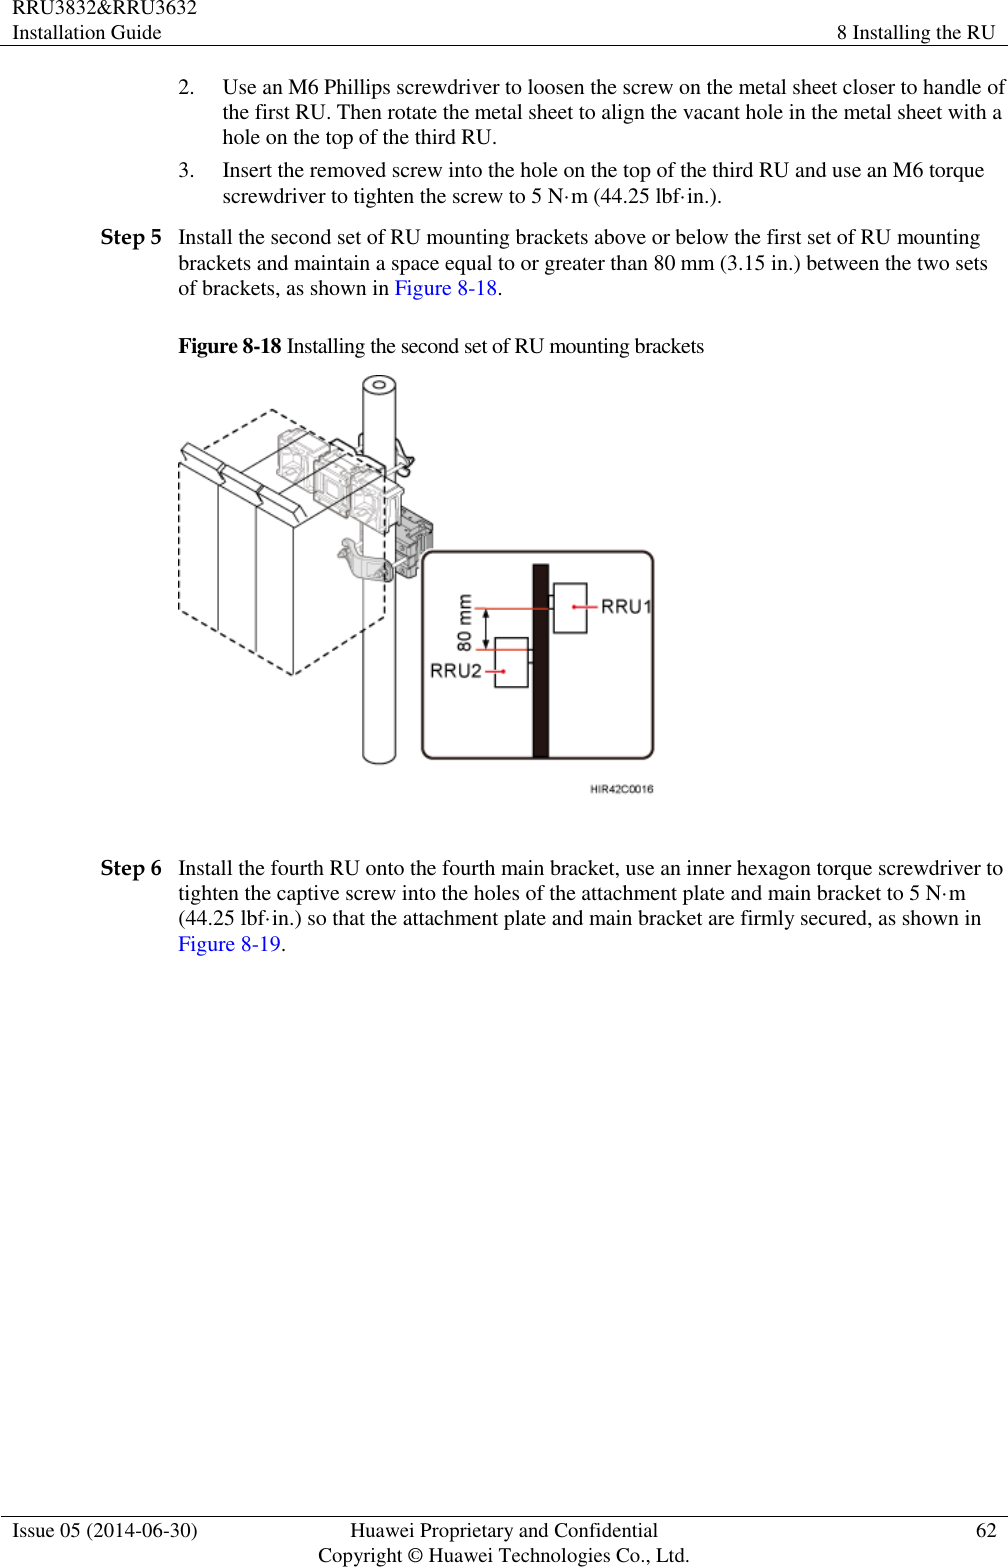 RRU3832&amp;RRU3632 Installation Guide 8 Installing the RU  Issue 05 (2014-06-30) Huawei Proprietary and Confidential                                     Copyright © Huawei Technologies Co., Ltd. 62  2. Use an M6 Phillips screwdriver to loosen the screw on the metal sheet closer to handle of the first RU. Then rotate the metal sheet to align the vacant hole in the metal sheet with a hole on the top of the third RU. 3. Insert the removed screw into the hole on the top of the third RU and use an M6 torque screwdriver to tighten the screw to 5 N·m (44.25 lbf·in.). Step 5 Install the second set of RU mounting brackets above or below the first set of RU mounting brackets and maintain a space equal to or greater than 80 mm (3.15 in.) between the two sets of brackets, as shown in Figure 8-18. Figure 8-18 Installing the second set of RU mounting brackets   Step 6 Install the fourth RU onto the fourth main bracket, use an inner hexagon torque screwdriver to tighten the captive screw into the holes of the attachment plate and main bracket to 5 N·m (44.25 lbf·in.) so that the attachment plate and main bracket are firmly secured, as shown in Figure 8-19. 